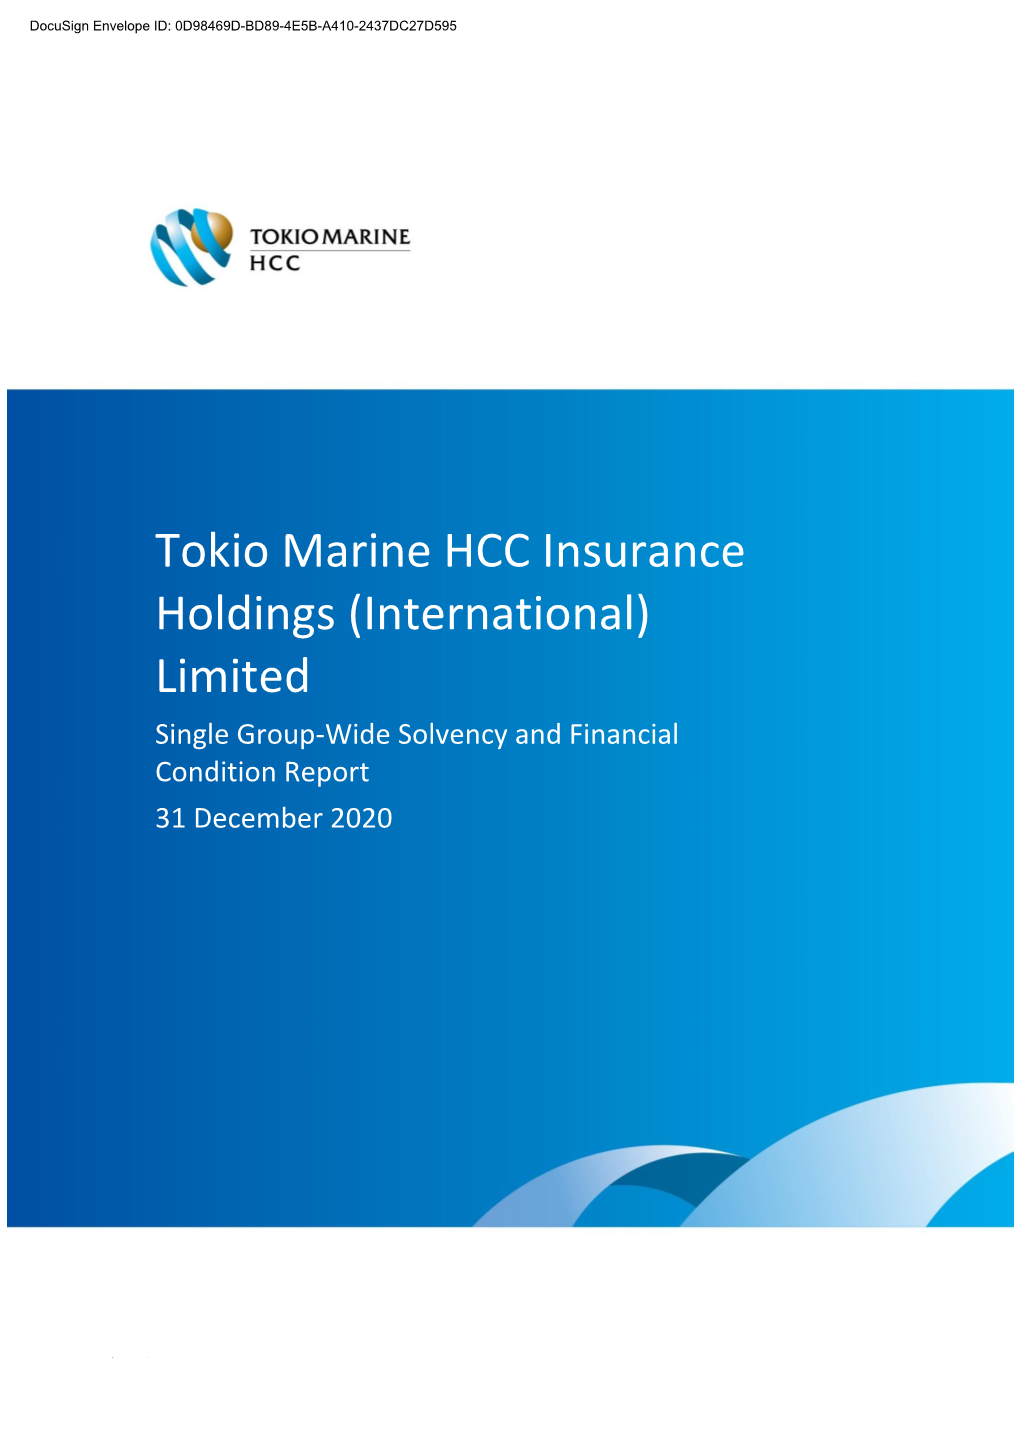 Tokio Marine HCC Insurance Holdings (International) Limited Single Group-Wide Solvency and Financial Condition Report 31 December 2020